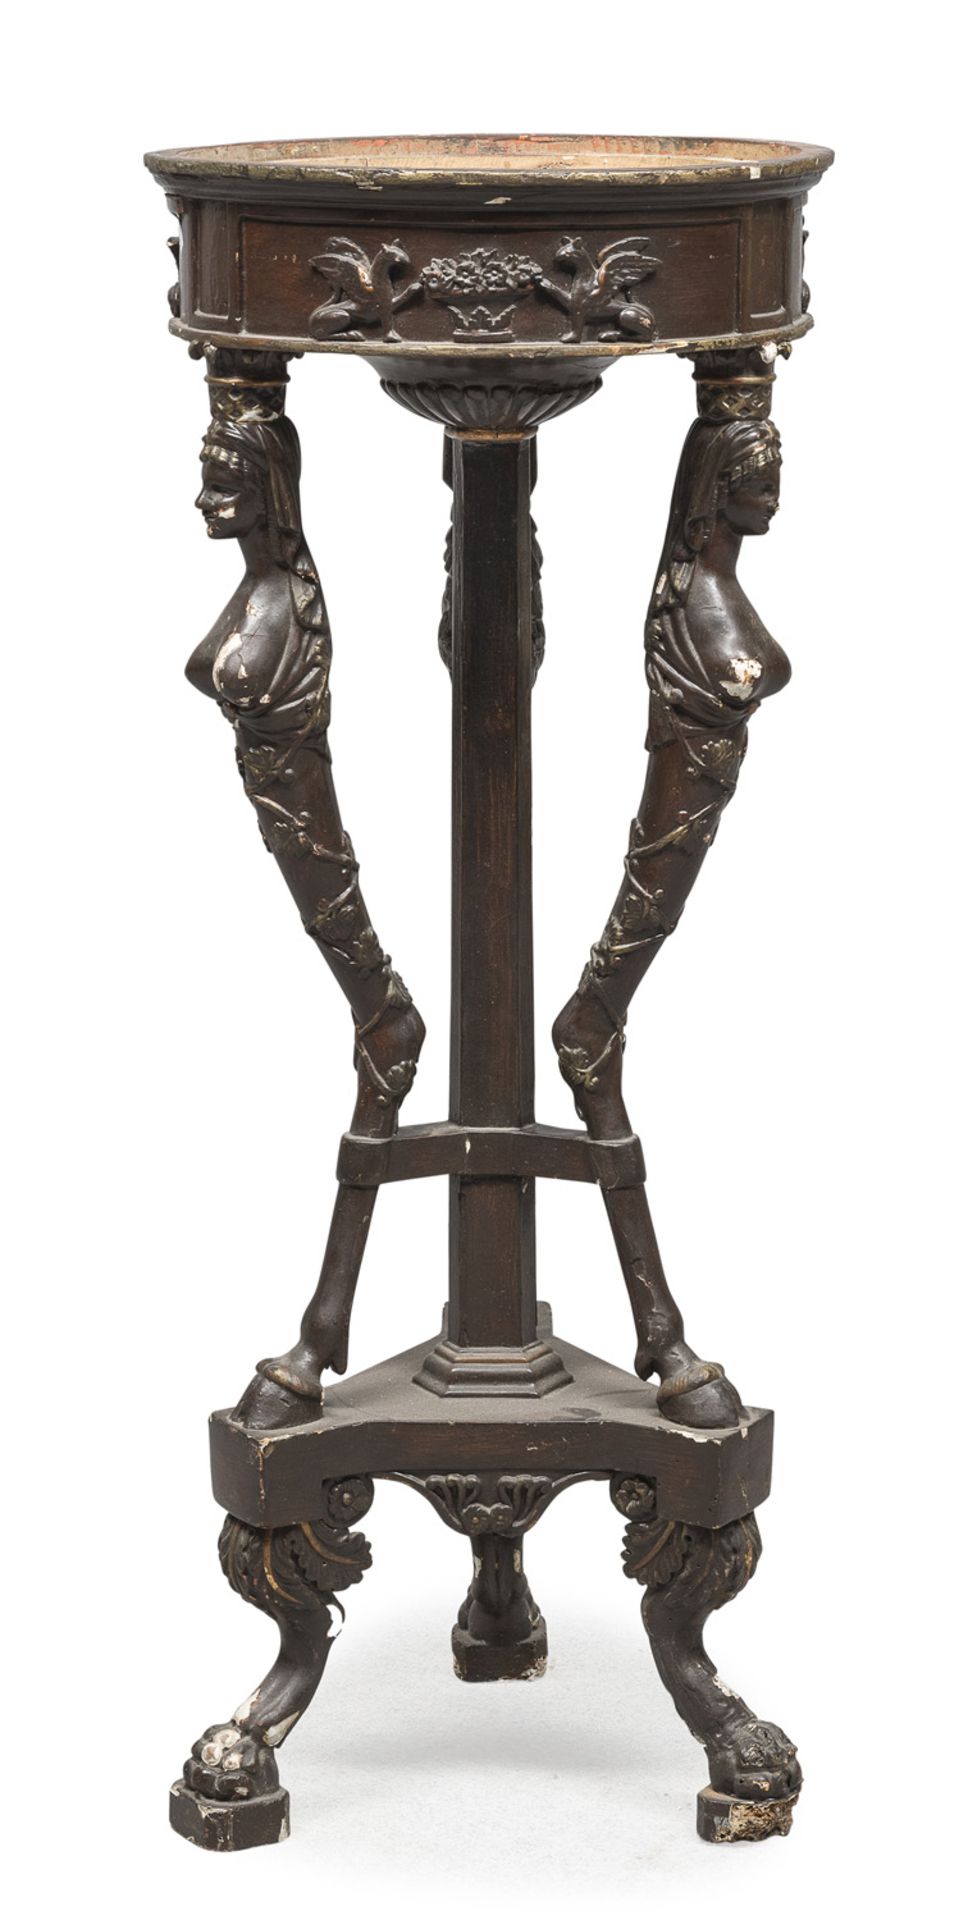 STAND IN LACQUERED WOOD NEOCLASSIC PERIOD